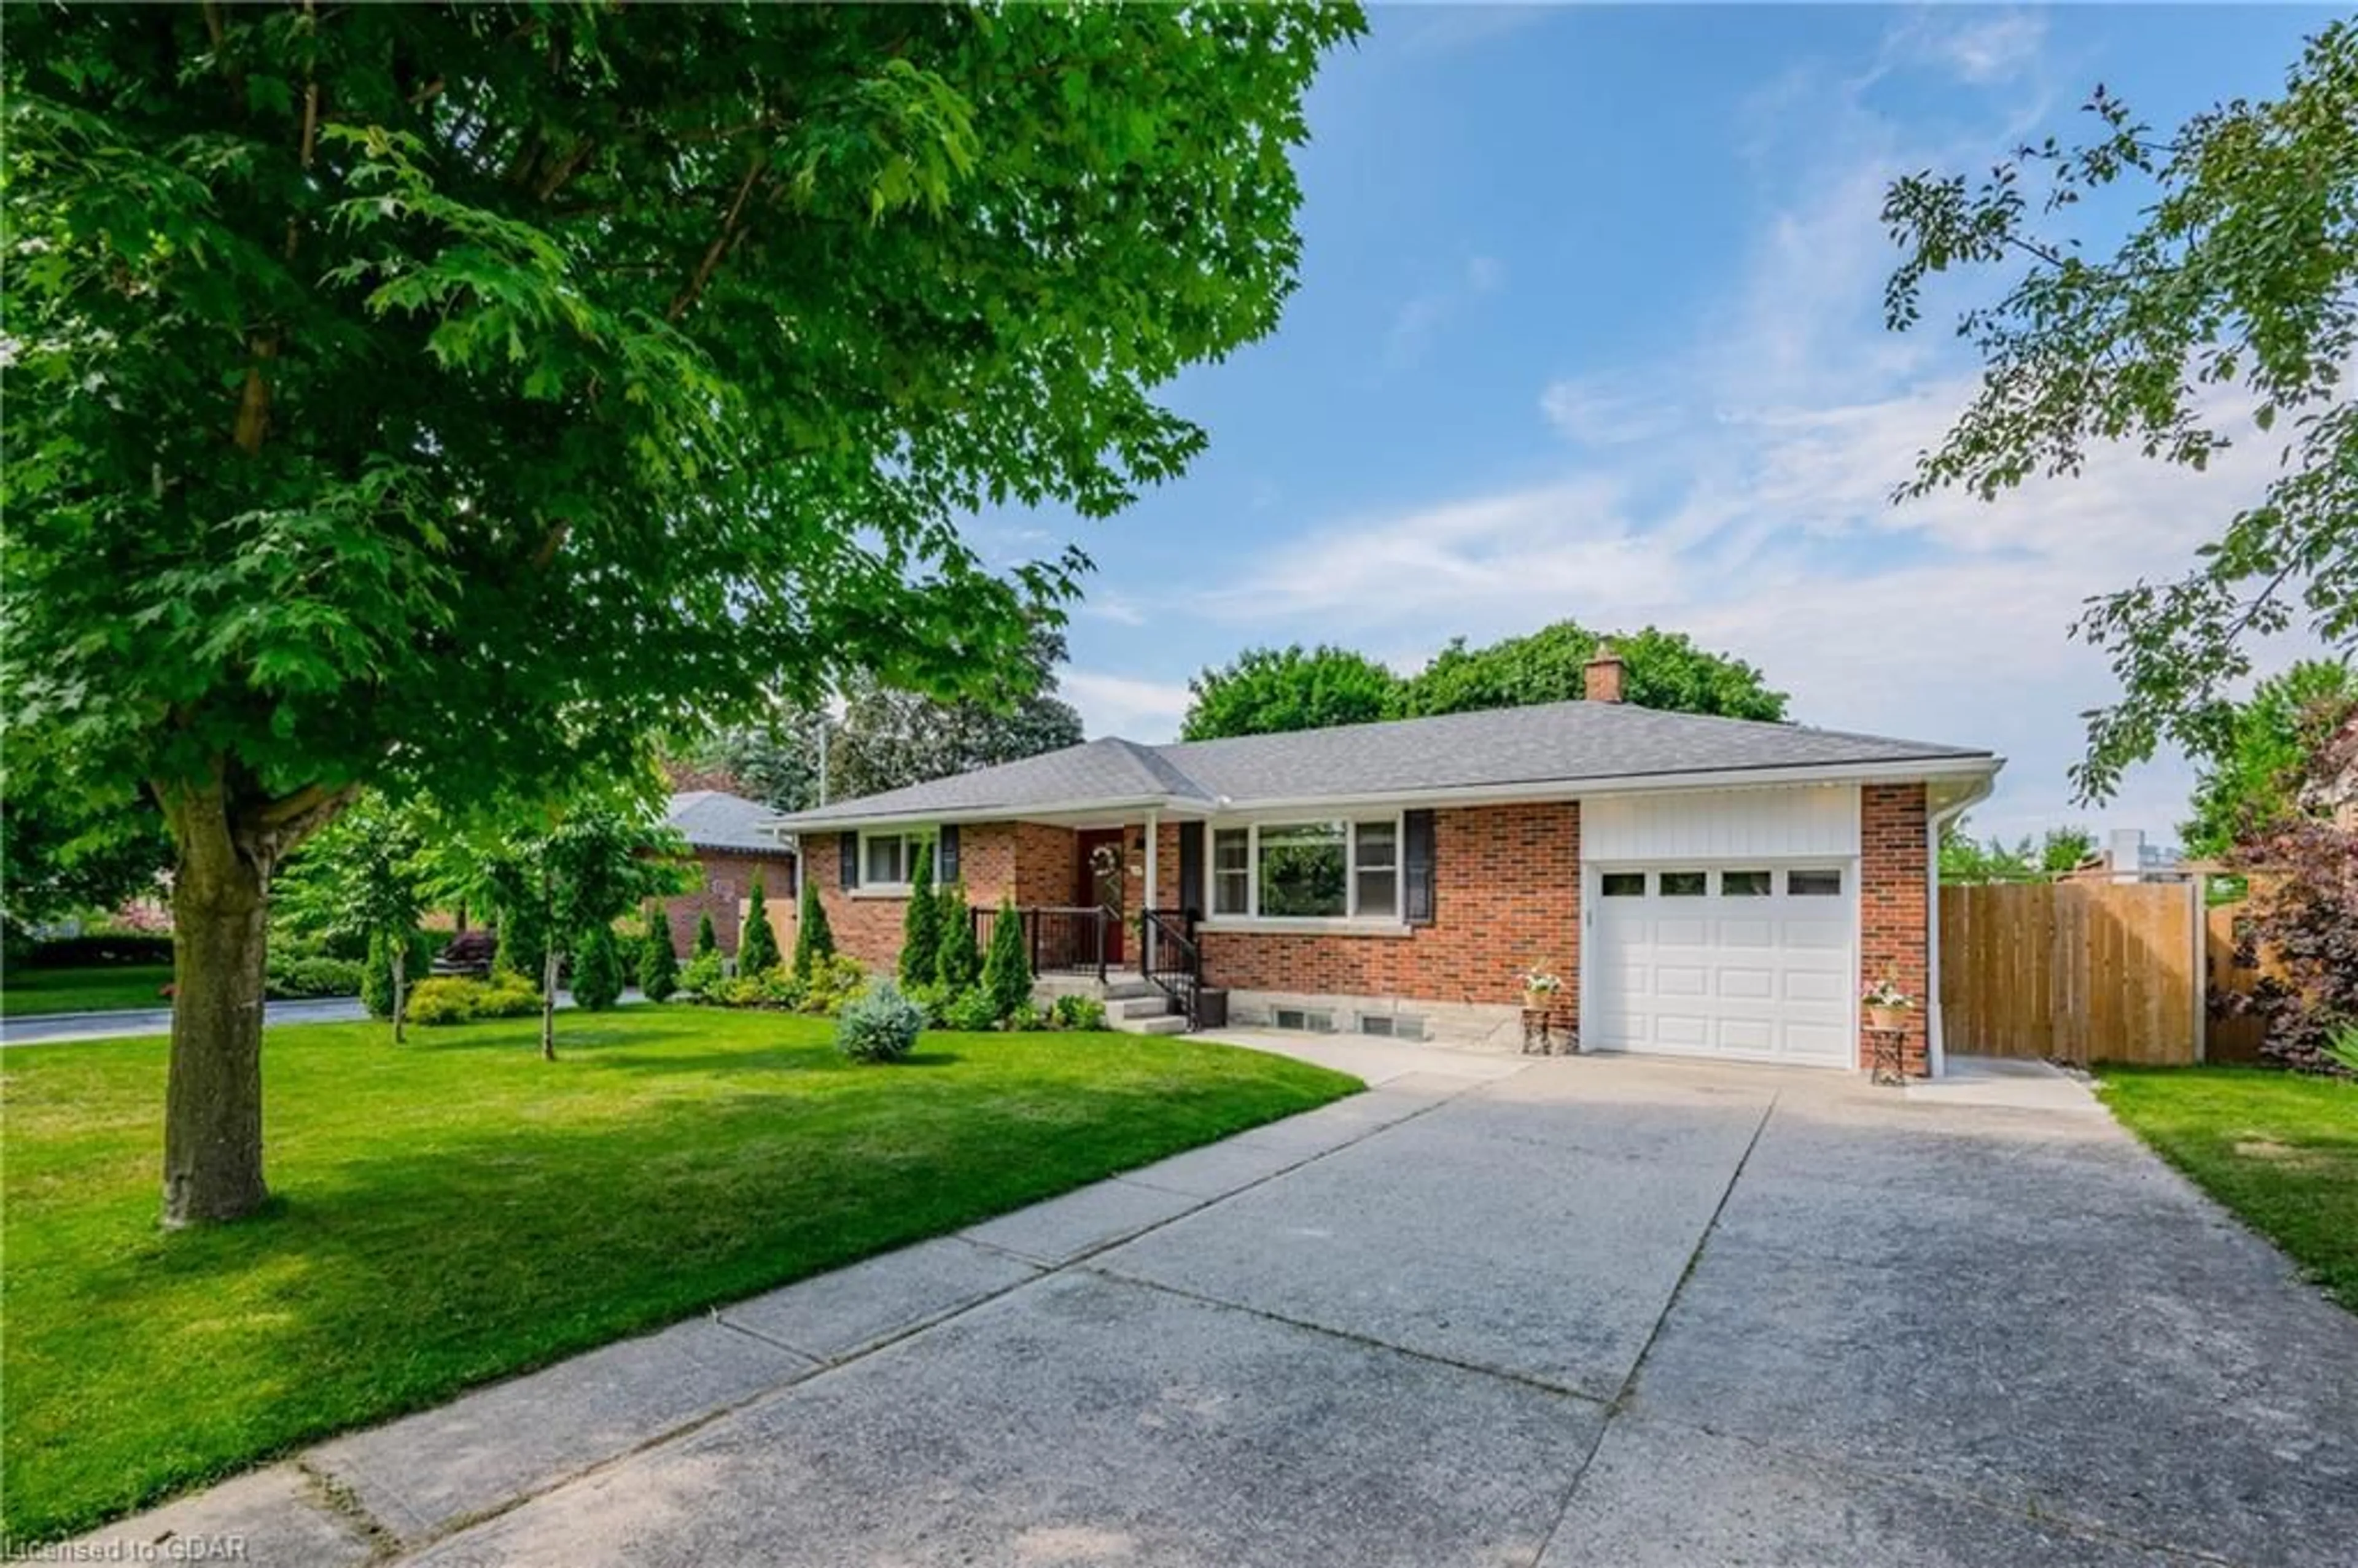 Home with brick exterior material for 10 Hamel Ave, Guelph Ontario N1H 5M1